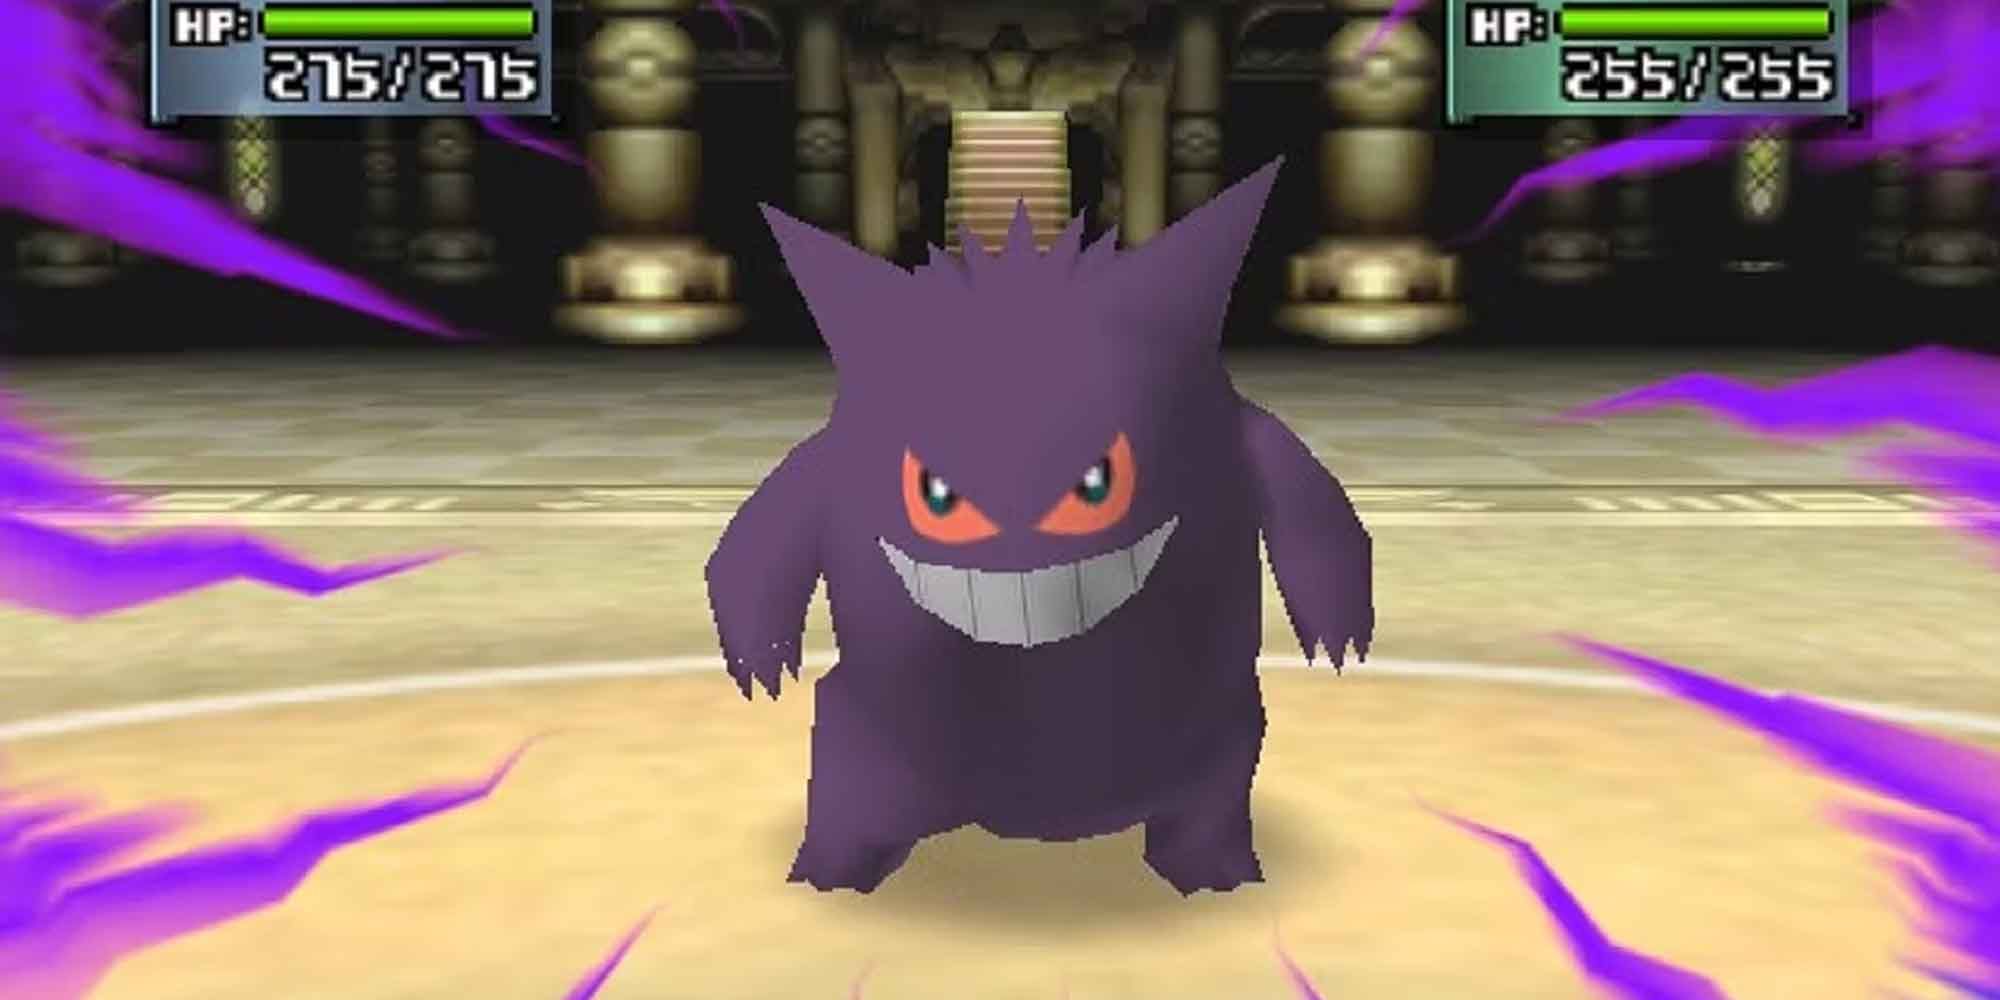 Gengar using a move during a match